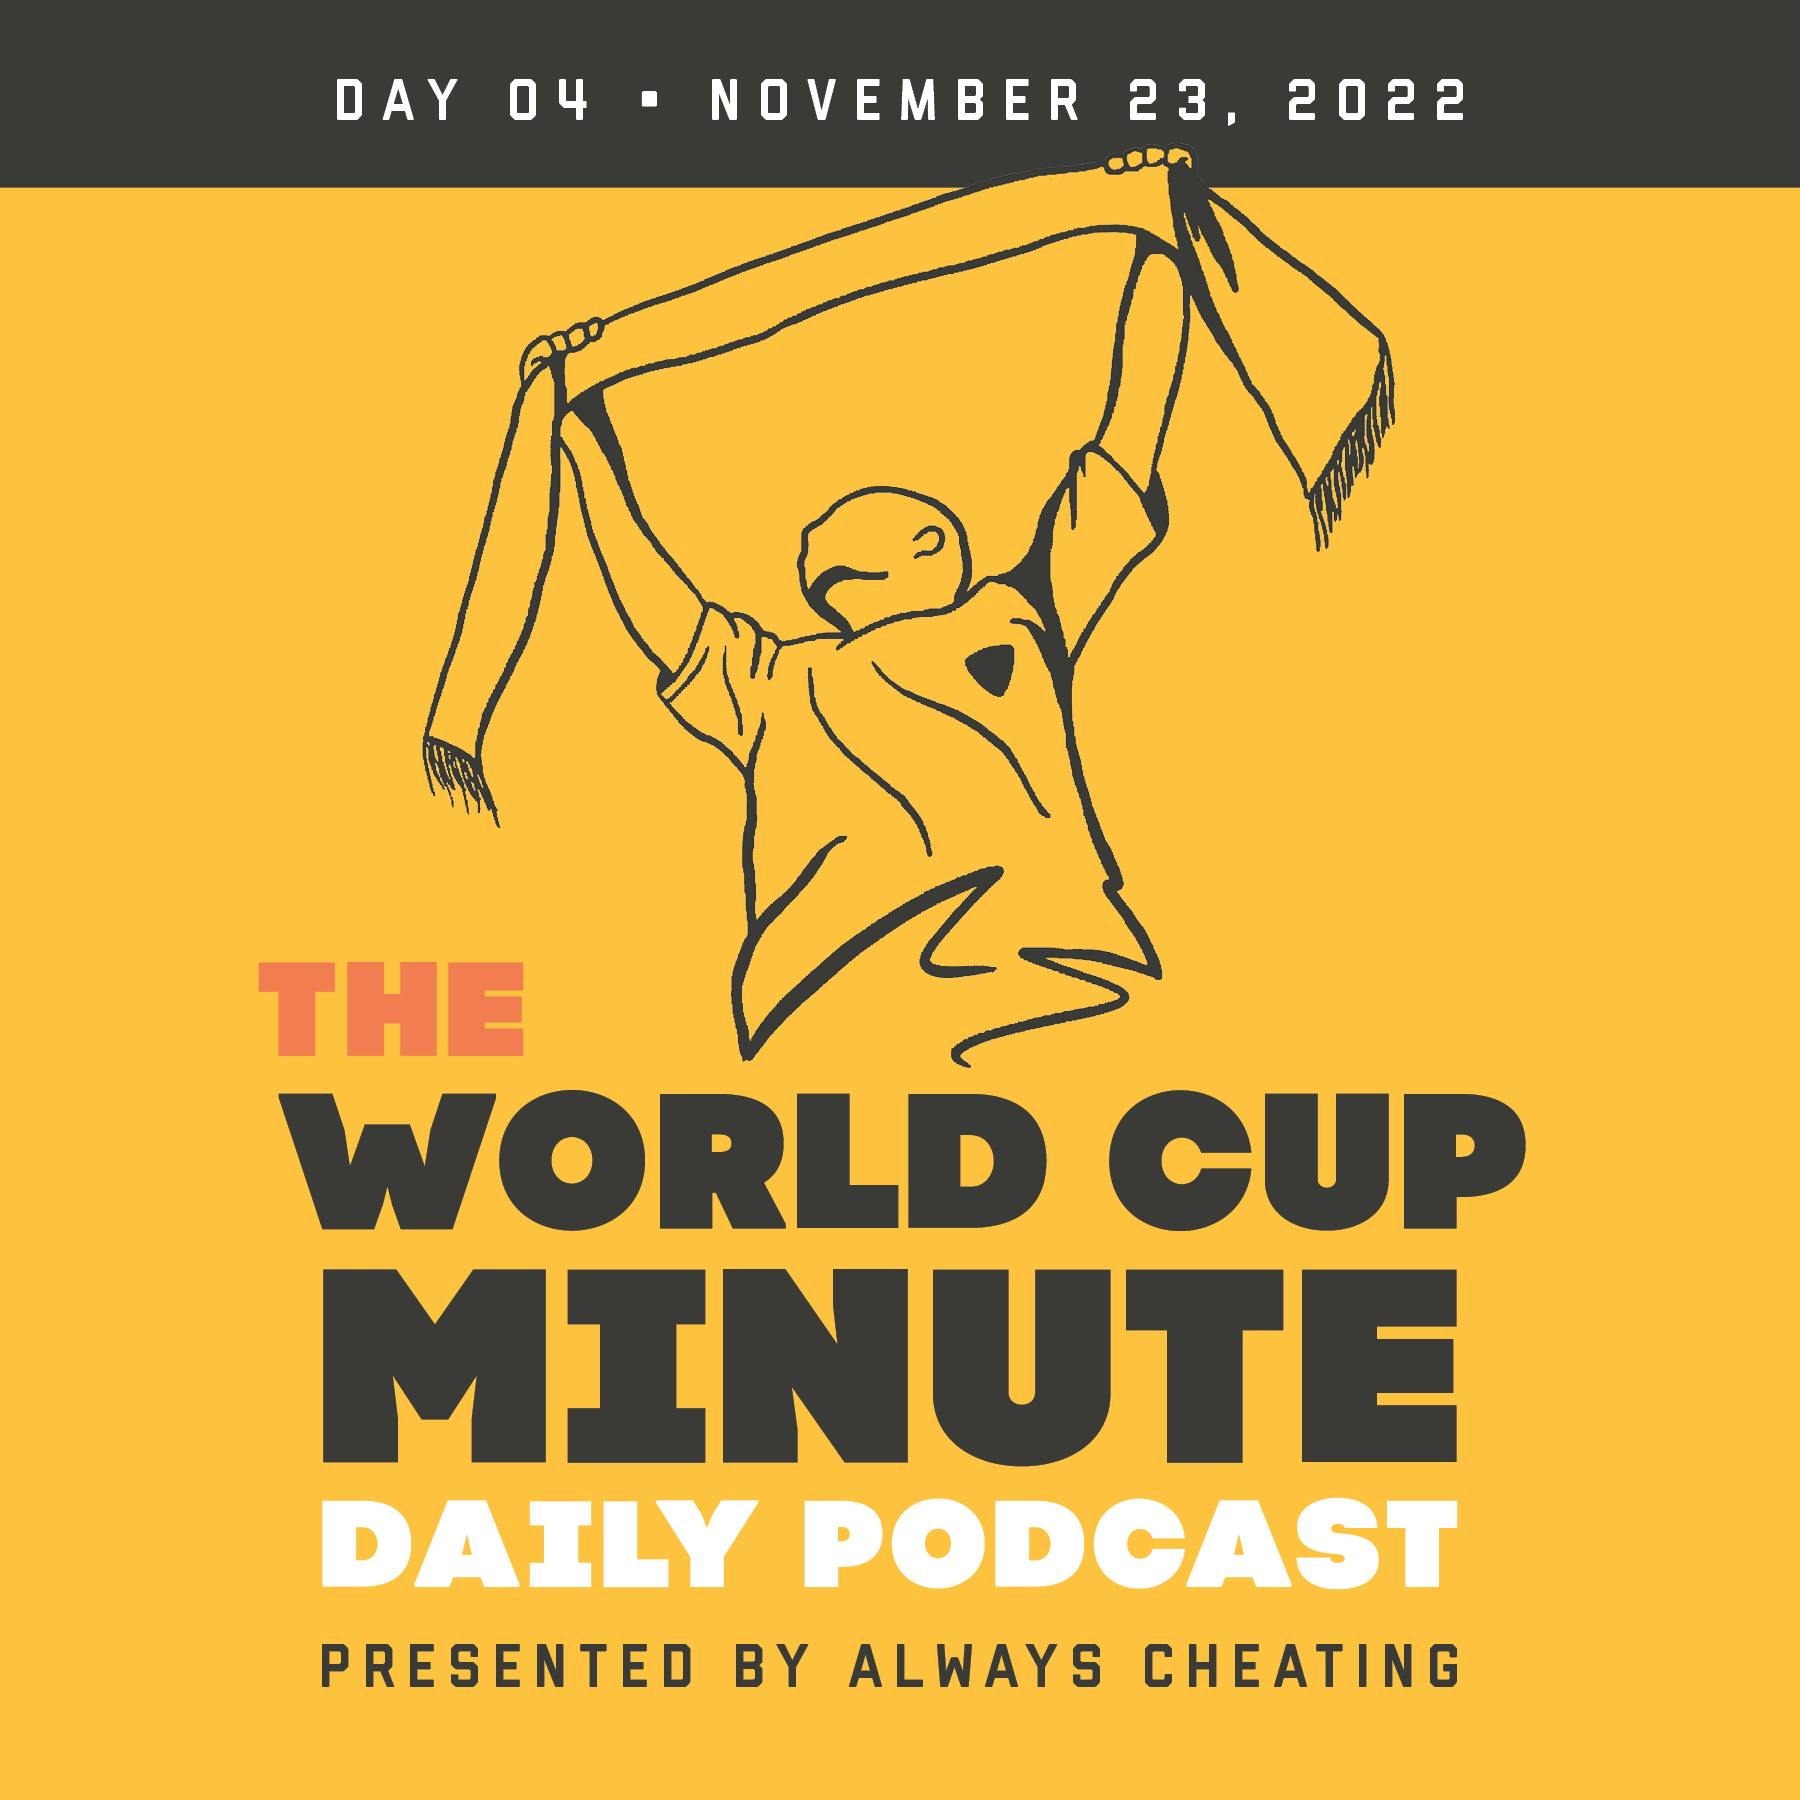 World Cup Day 4 - November 23, 2022